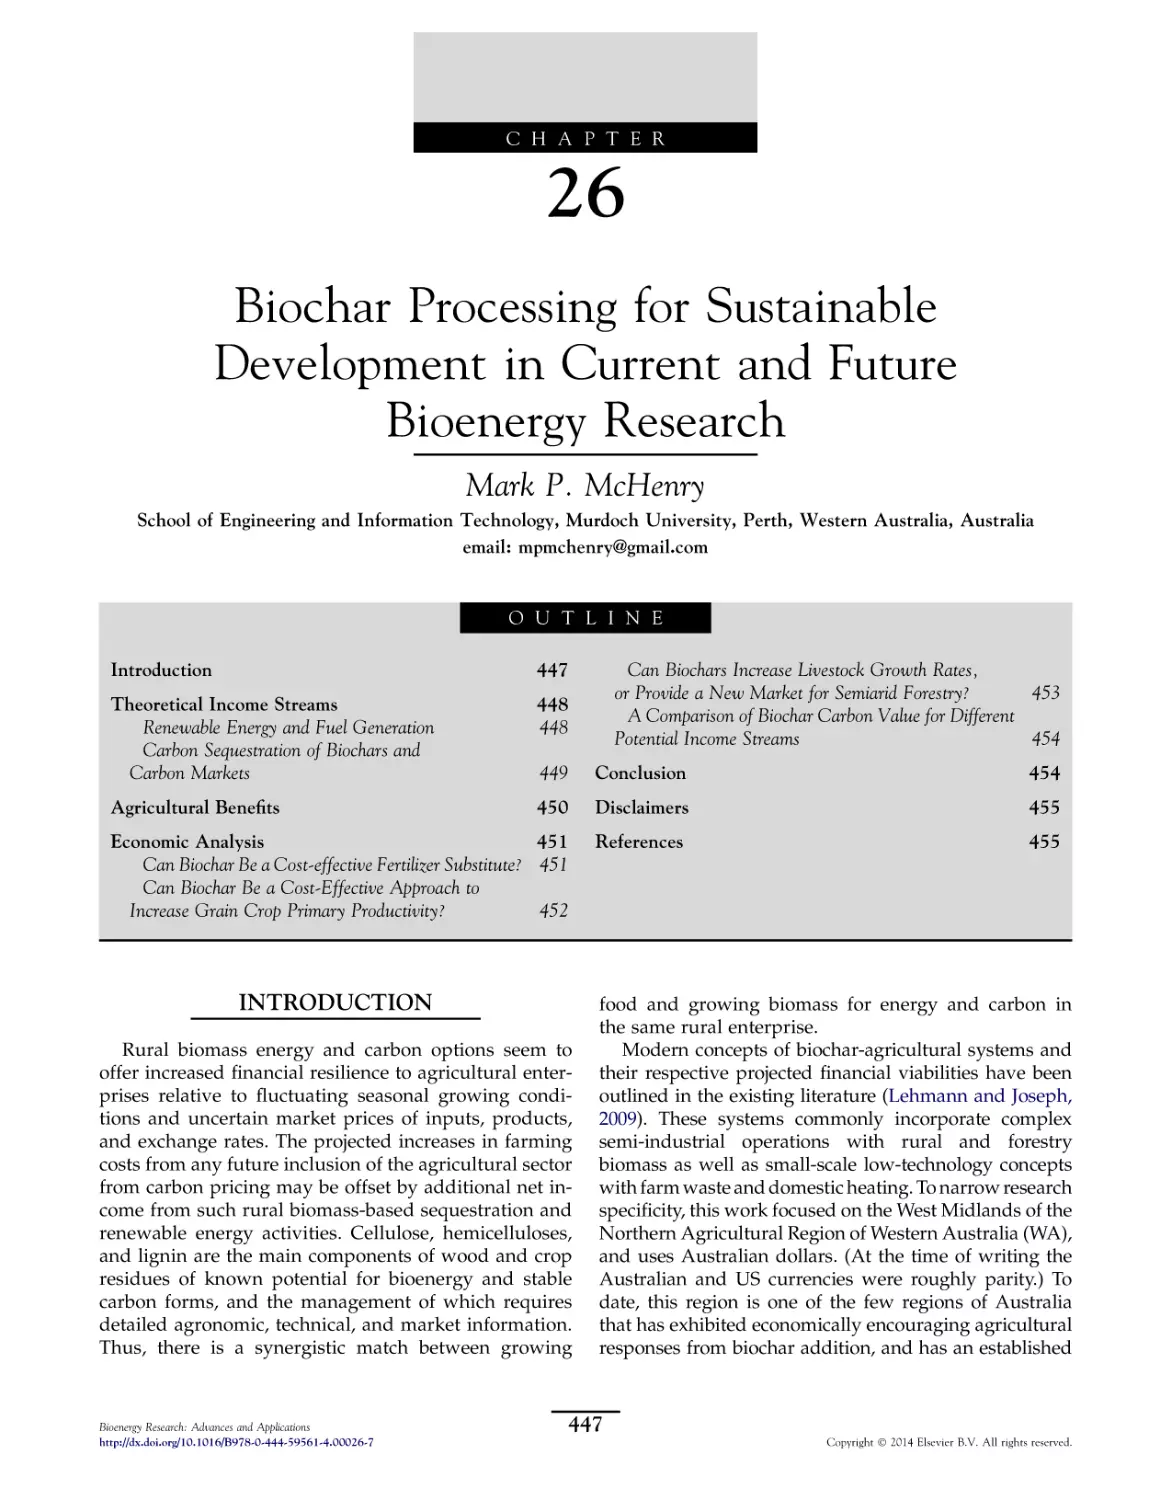 26. Biochar Processing for Sustainable Development in Current and Future Bioenergy Research
Introduction